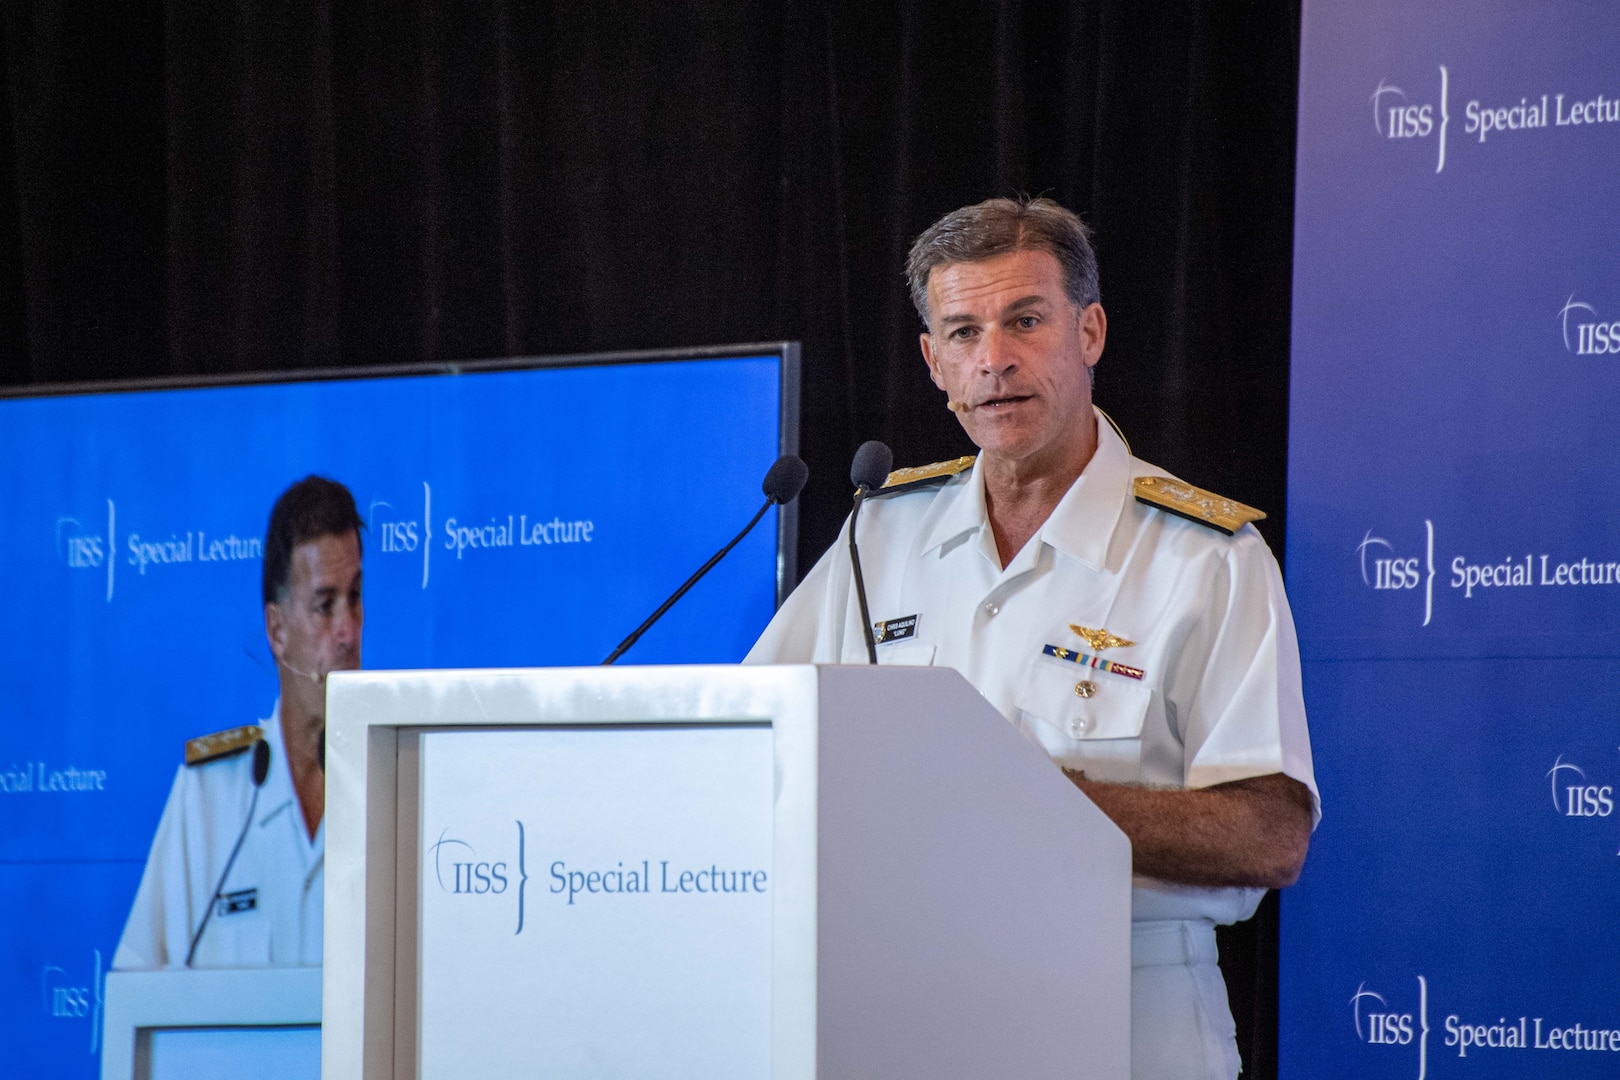 SINGAPORE (March 16, 2023) Adm. John C. Aquilino, Commander U.S. Indo-Pacific Command, delivers a special lecture titled “Managing Strategic Competition and the Quest for an Enduring Future in the Indo-Pacific” at an event hosted by the International Institute for Strategic Studies (IISS). The IISS Special Lectures bring together prominent members and experts in order to discuss important developments in Asia-Pacific security with global and regional leaders. USINDOPACOM is committed to enhancing stability in the Asia-Pacific region by promoting security cooperation, encouraging peaceful development, responding to contingencies, deterring aggression and, when necessary, fighting to win. (U.S. Navy photo by Chief Mass Communication Specialist Shannon M. Smith)